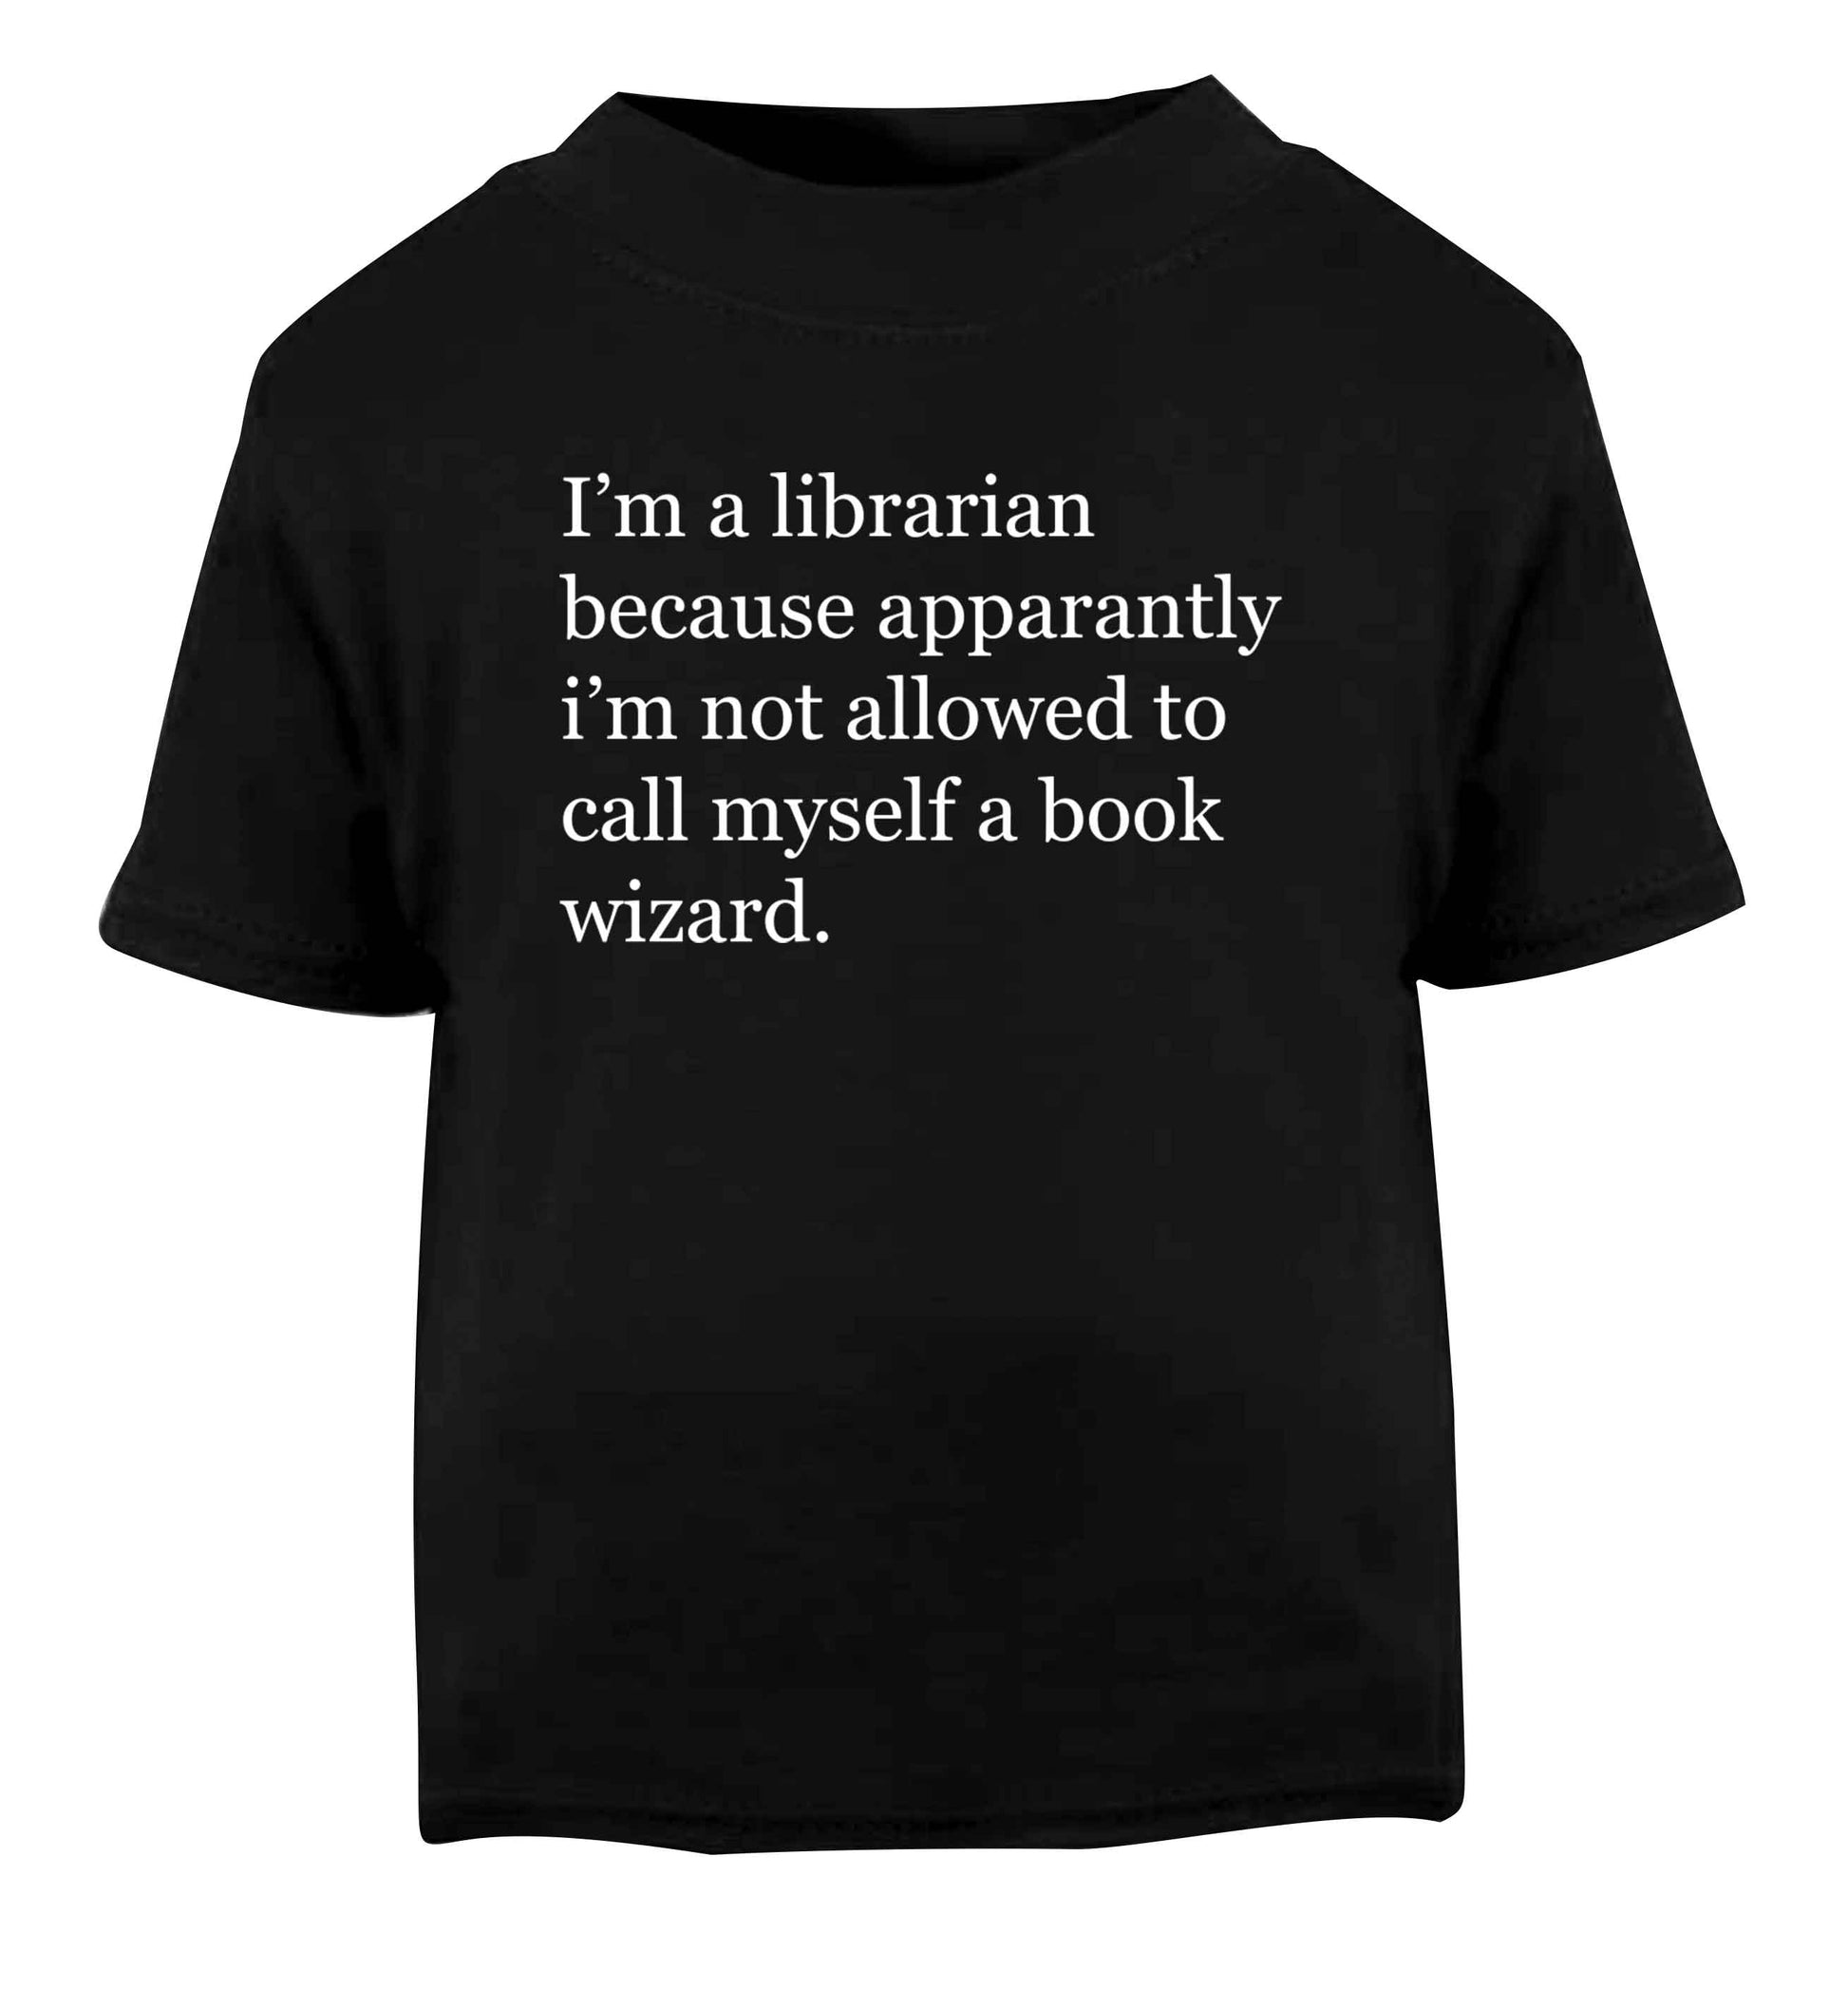 iÕm a librarian because apparantly iÕm not allowed to call myself a book wizard Black Baby Toddler Tshirt 2 years